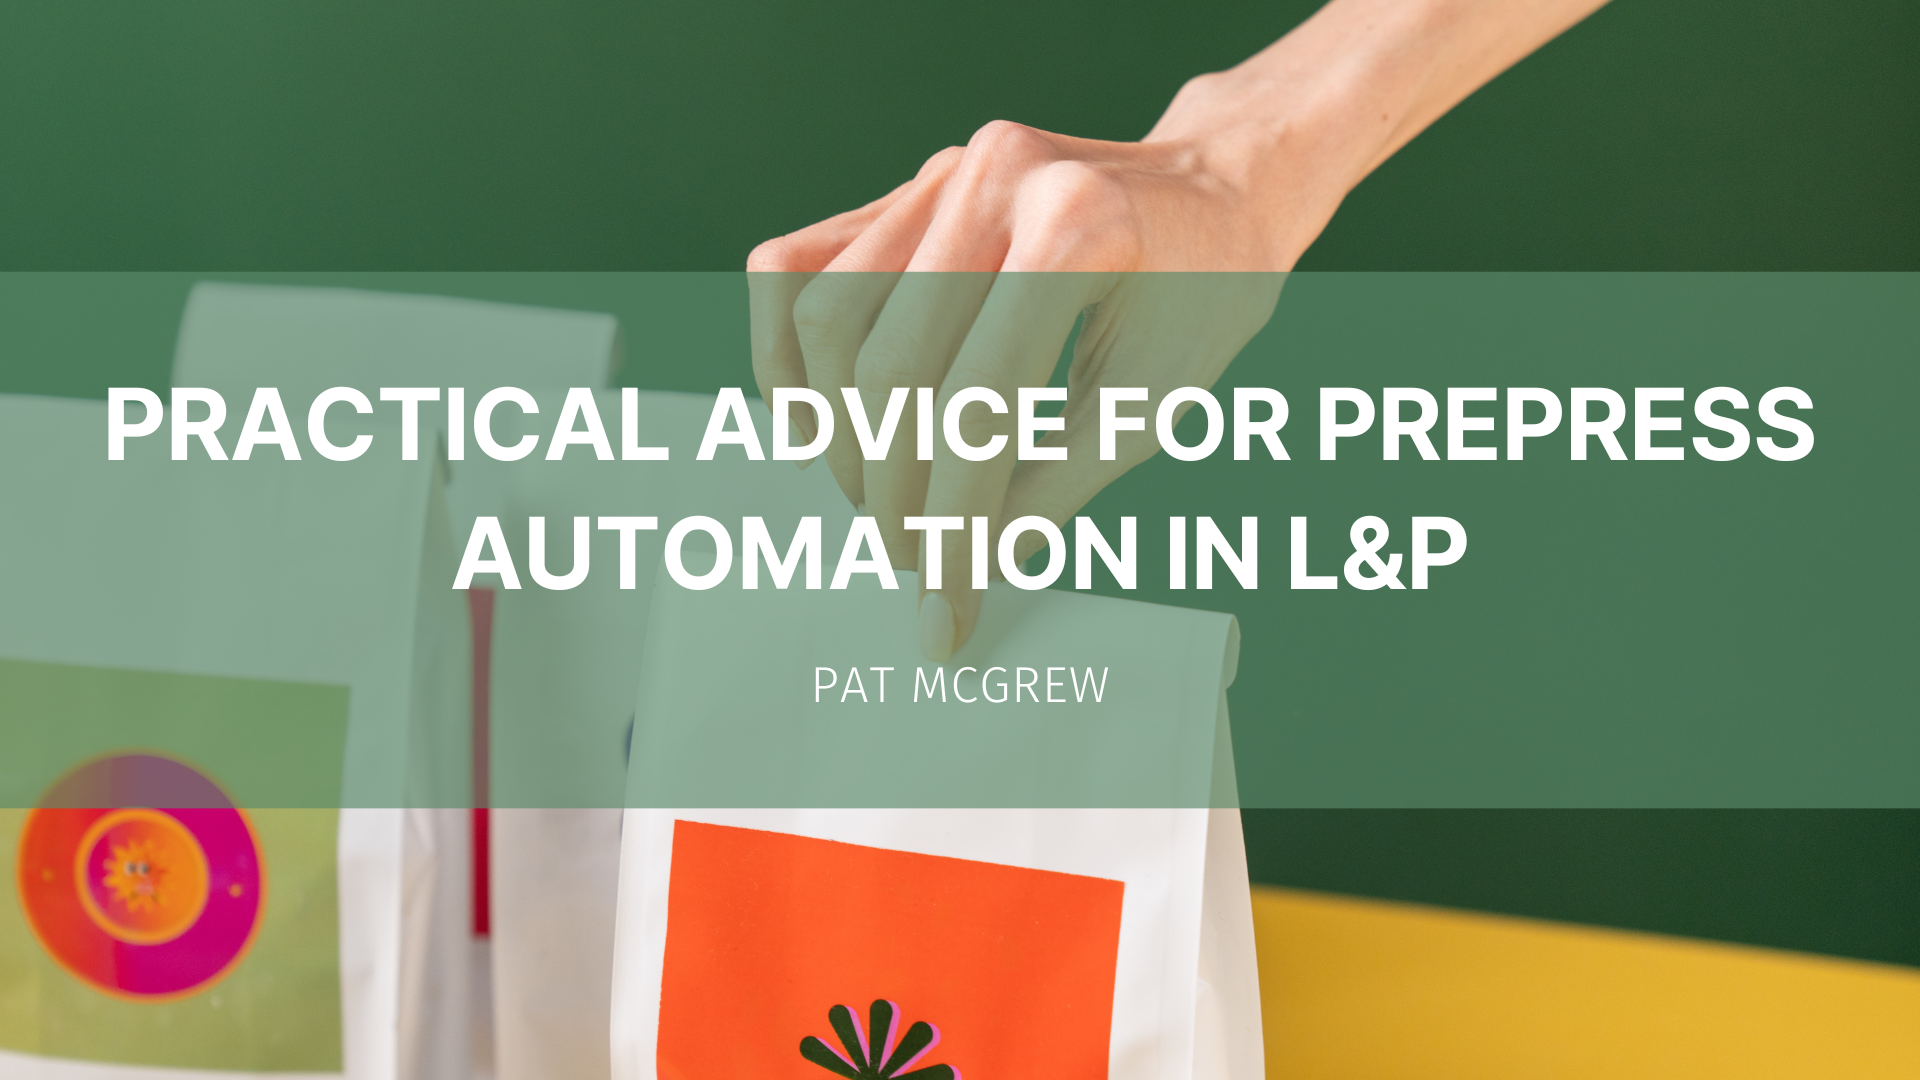 Featured image for “Practical Advice for Prepress Automation in L&P”